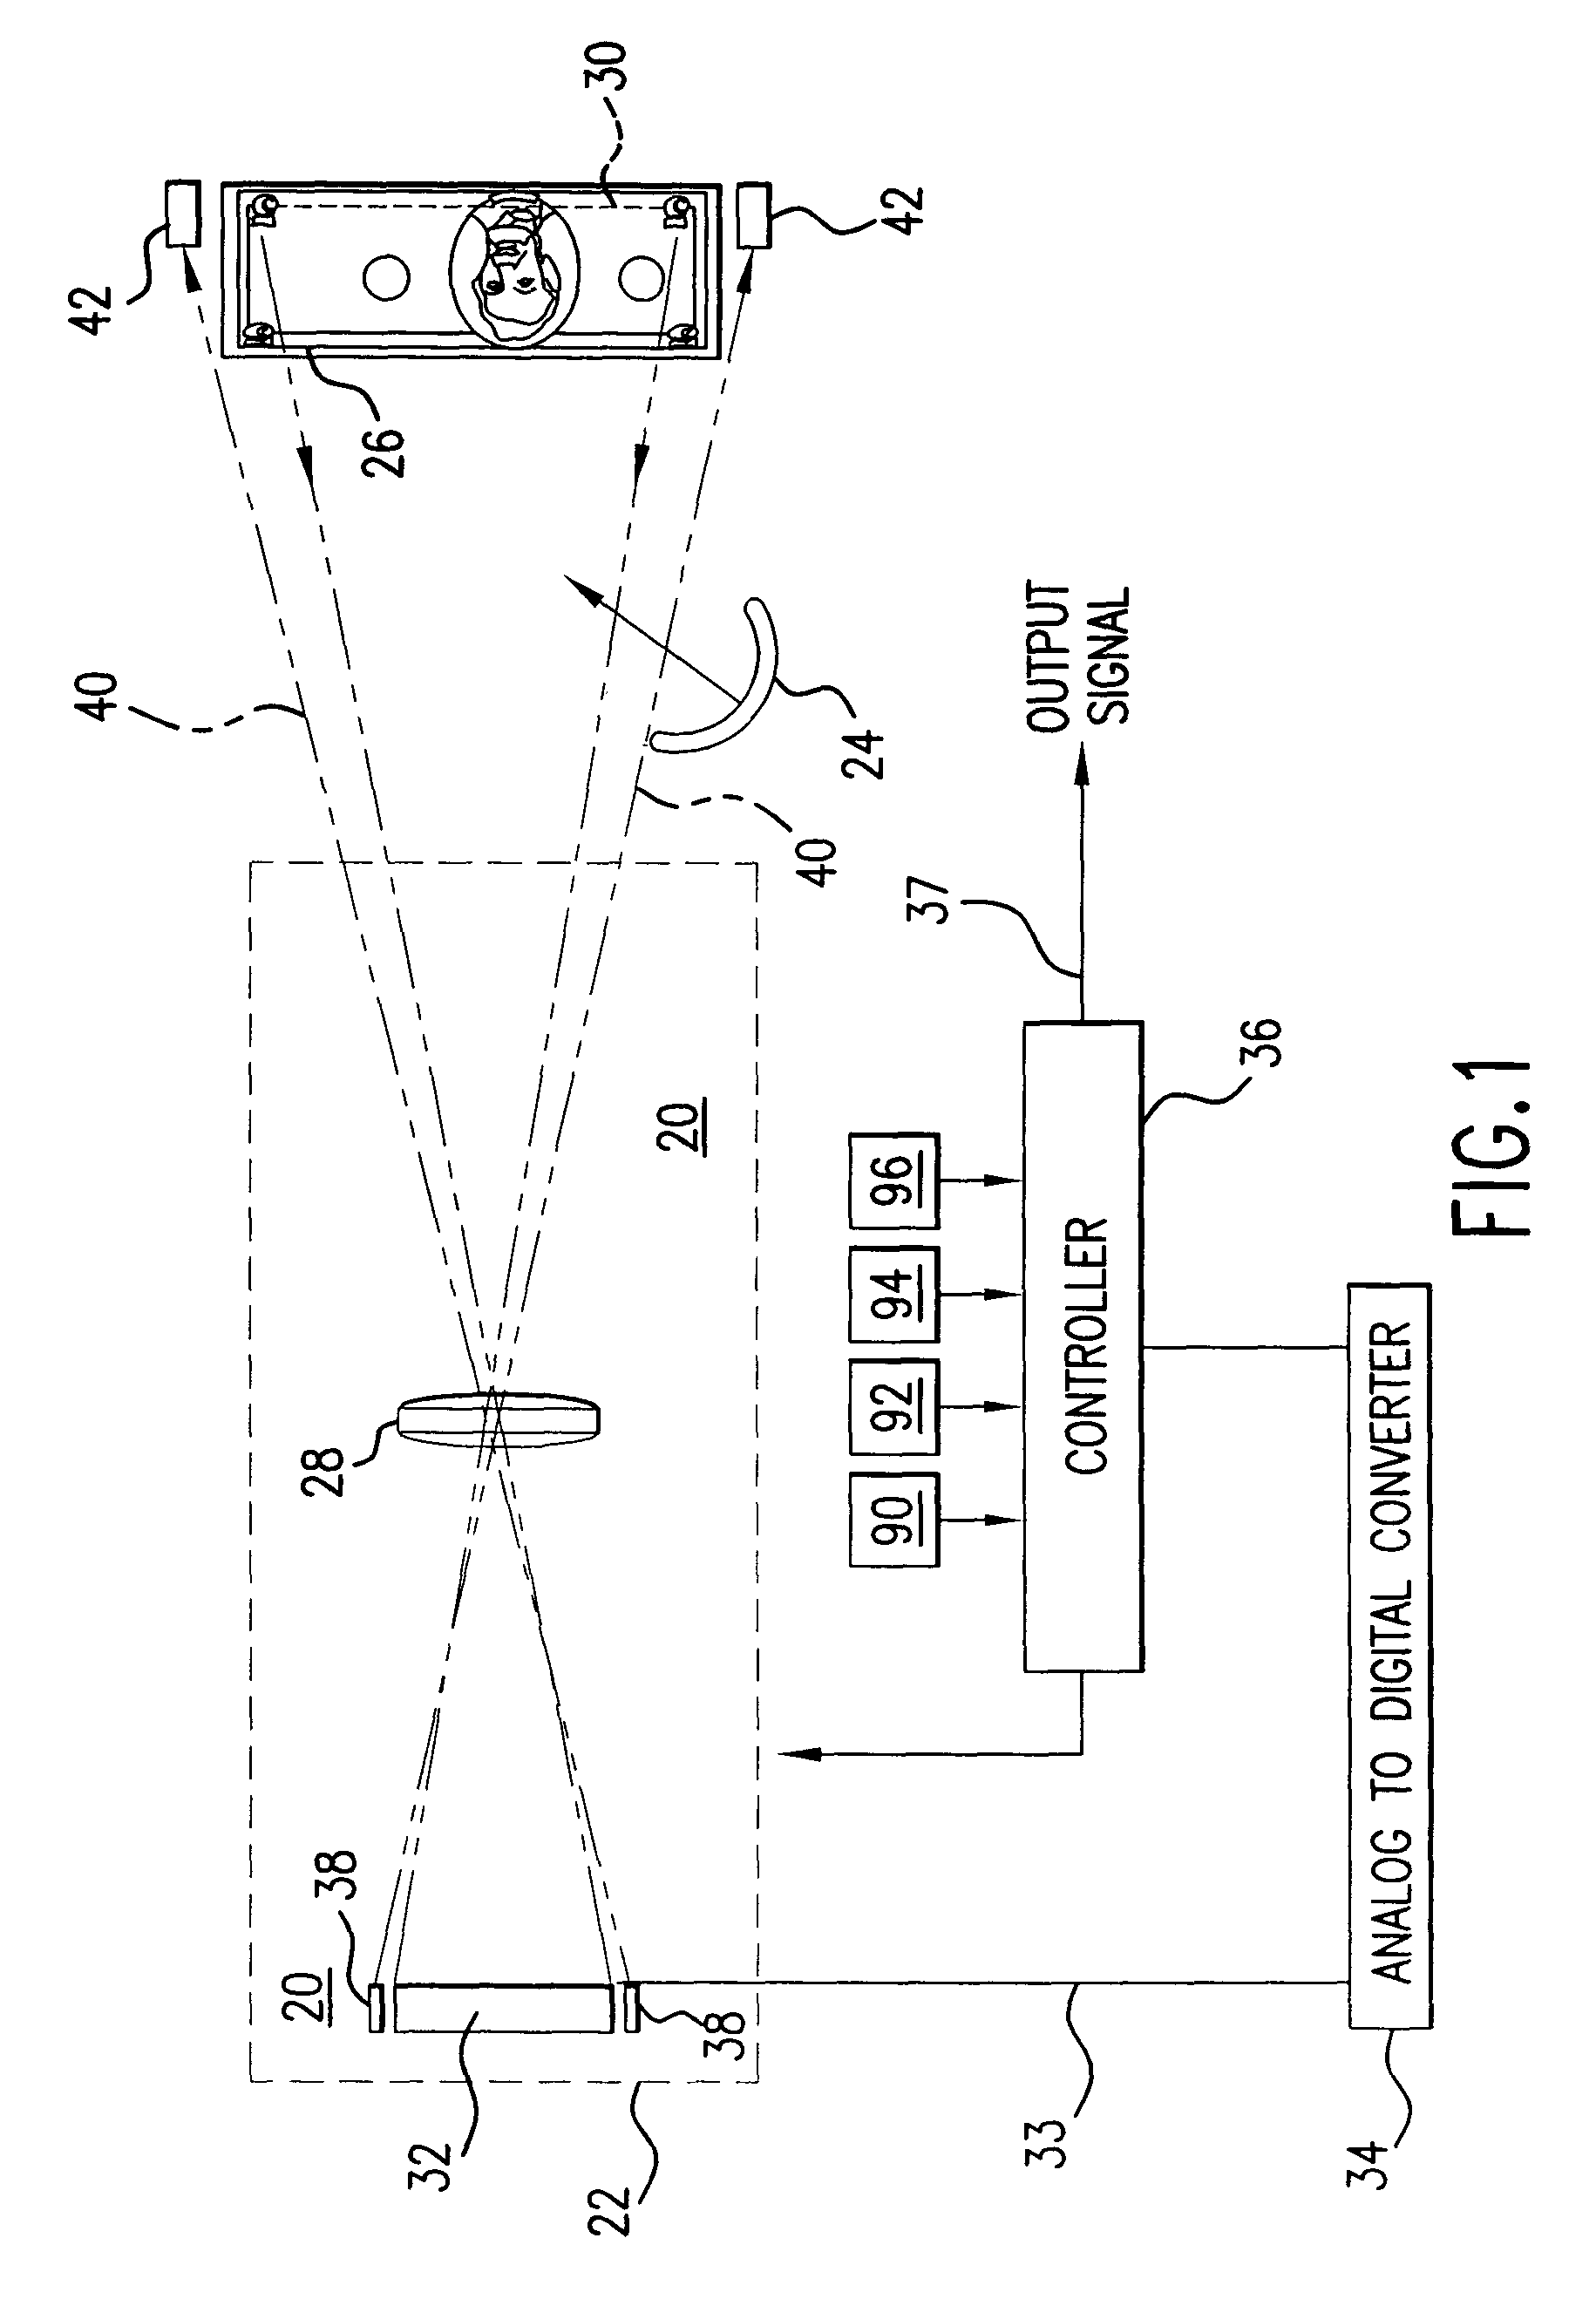 Digital diagnostic apparatus and vision system with related methods